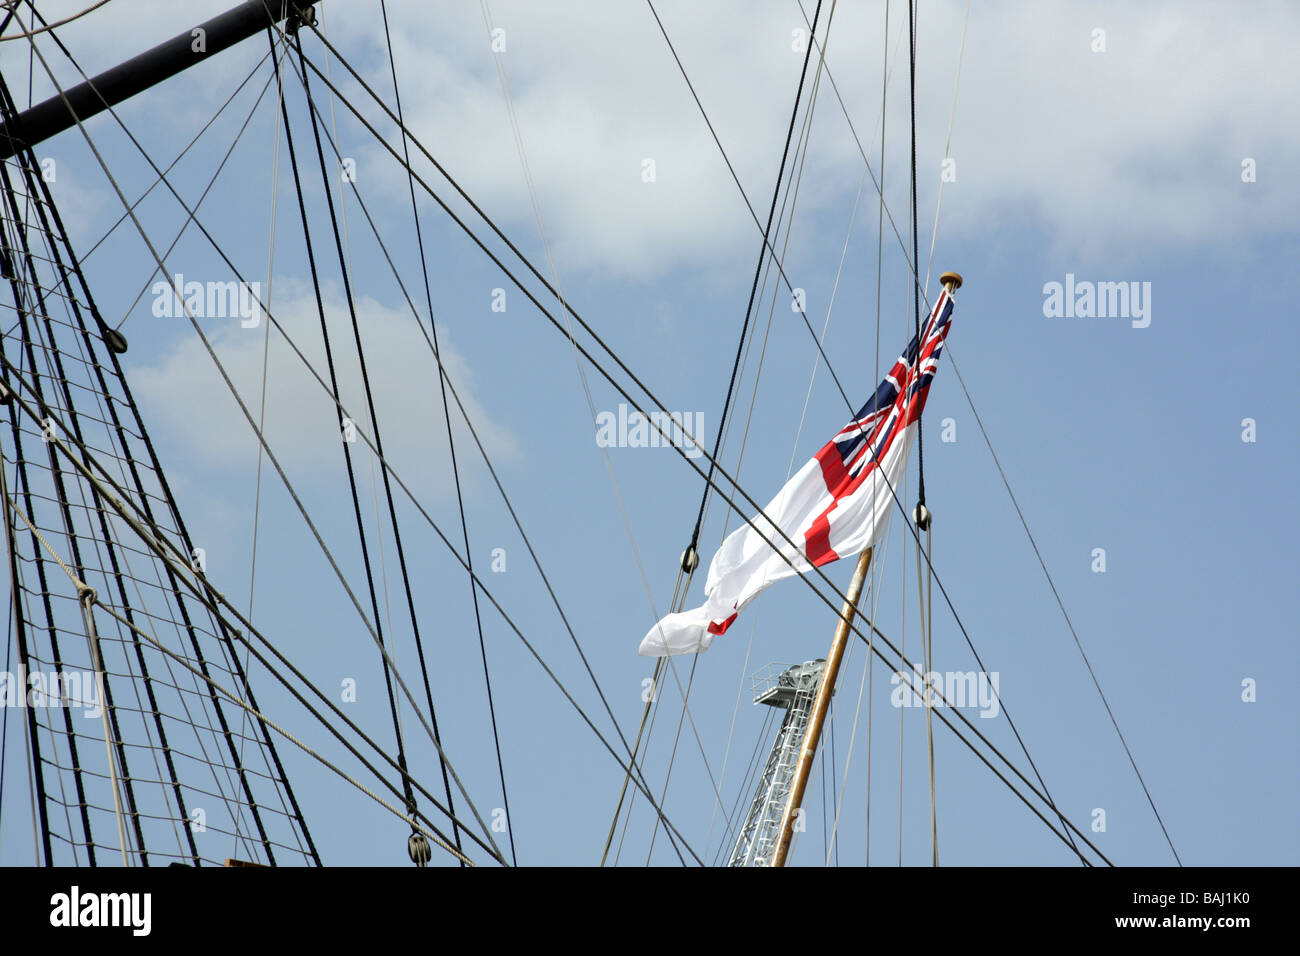 Royal Navy White Ensign flag flying against a blue sky with ship rigging in the background Stock Photo